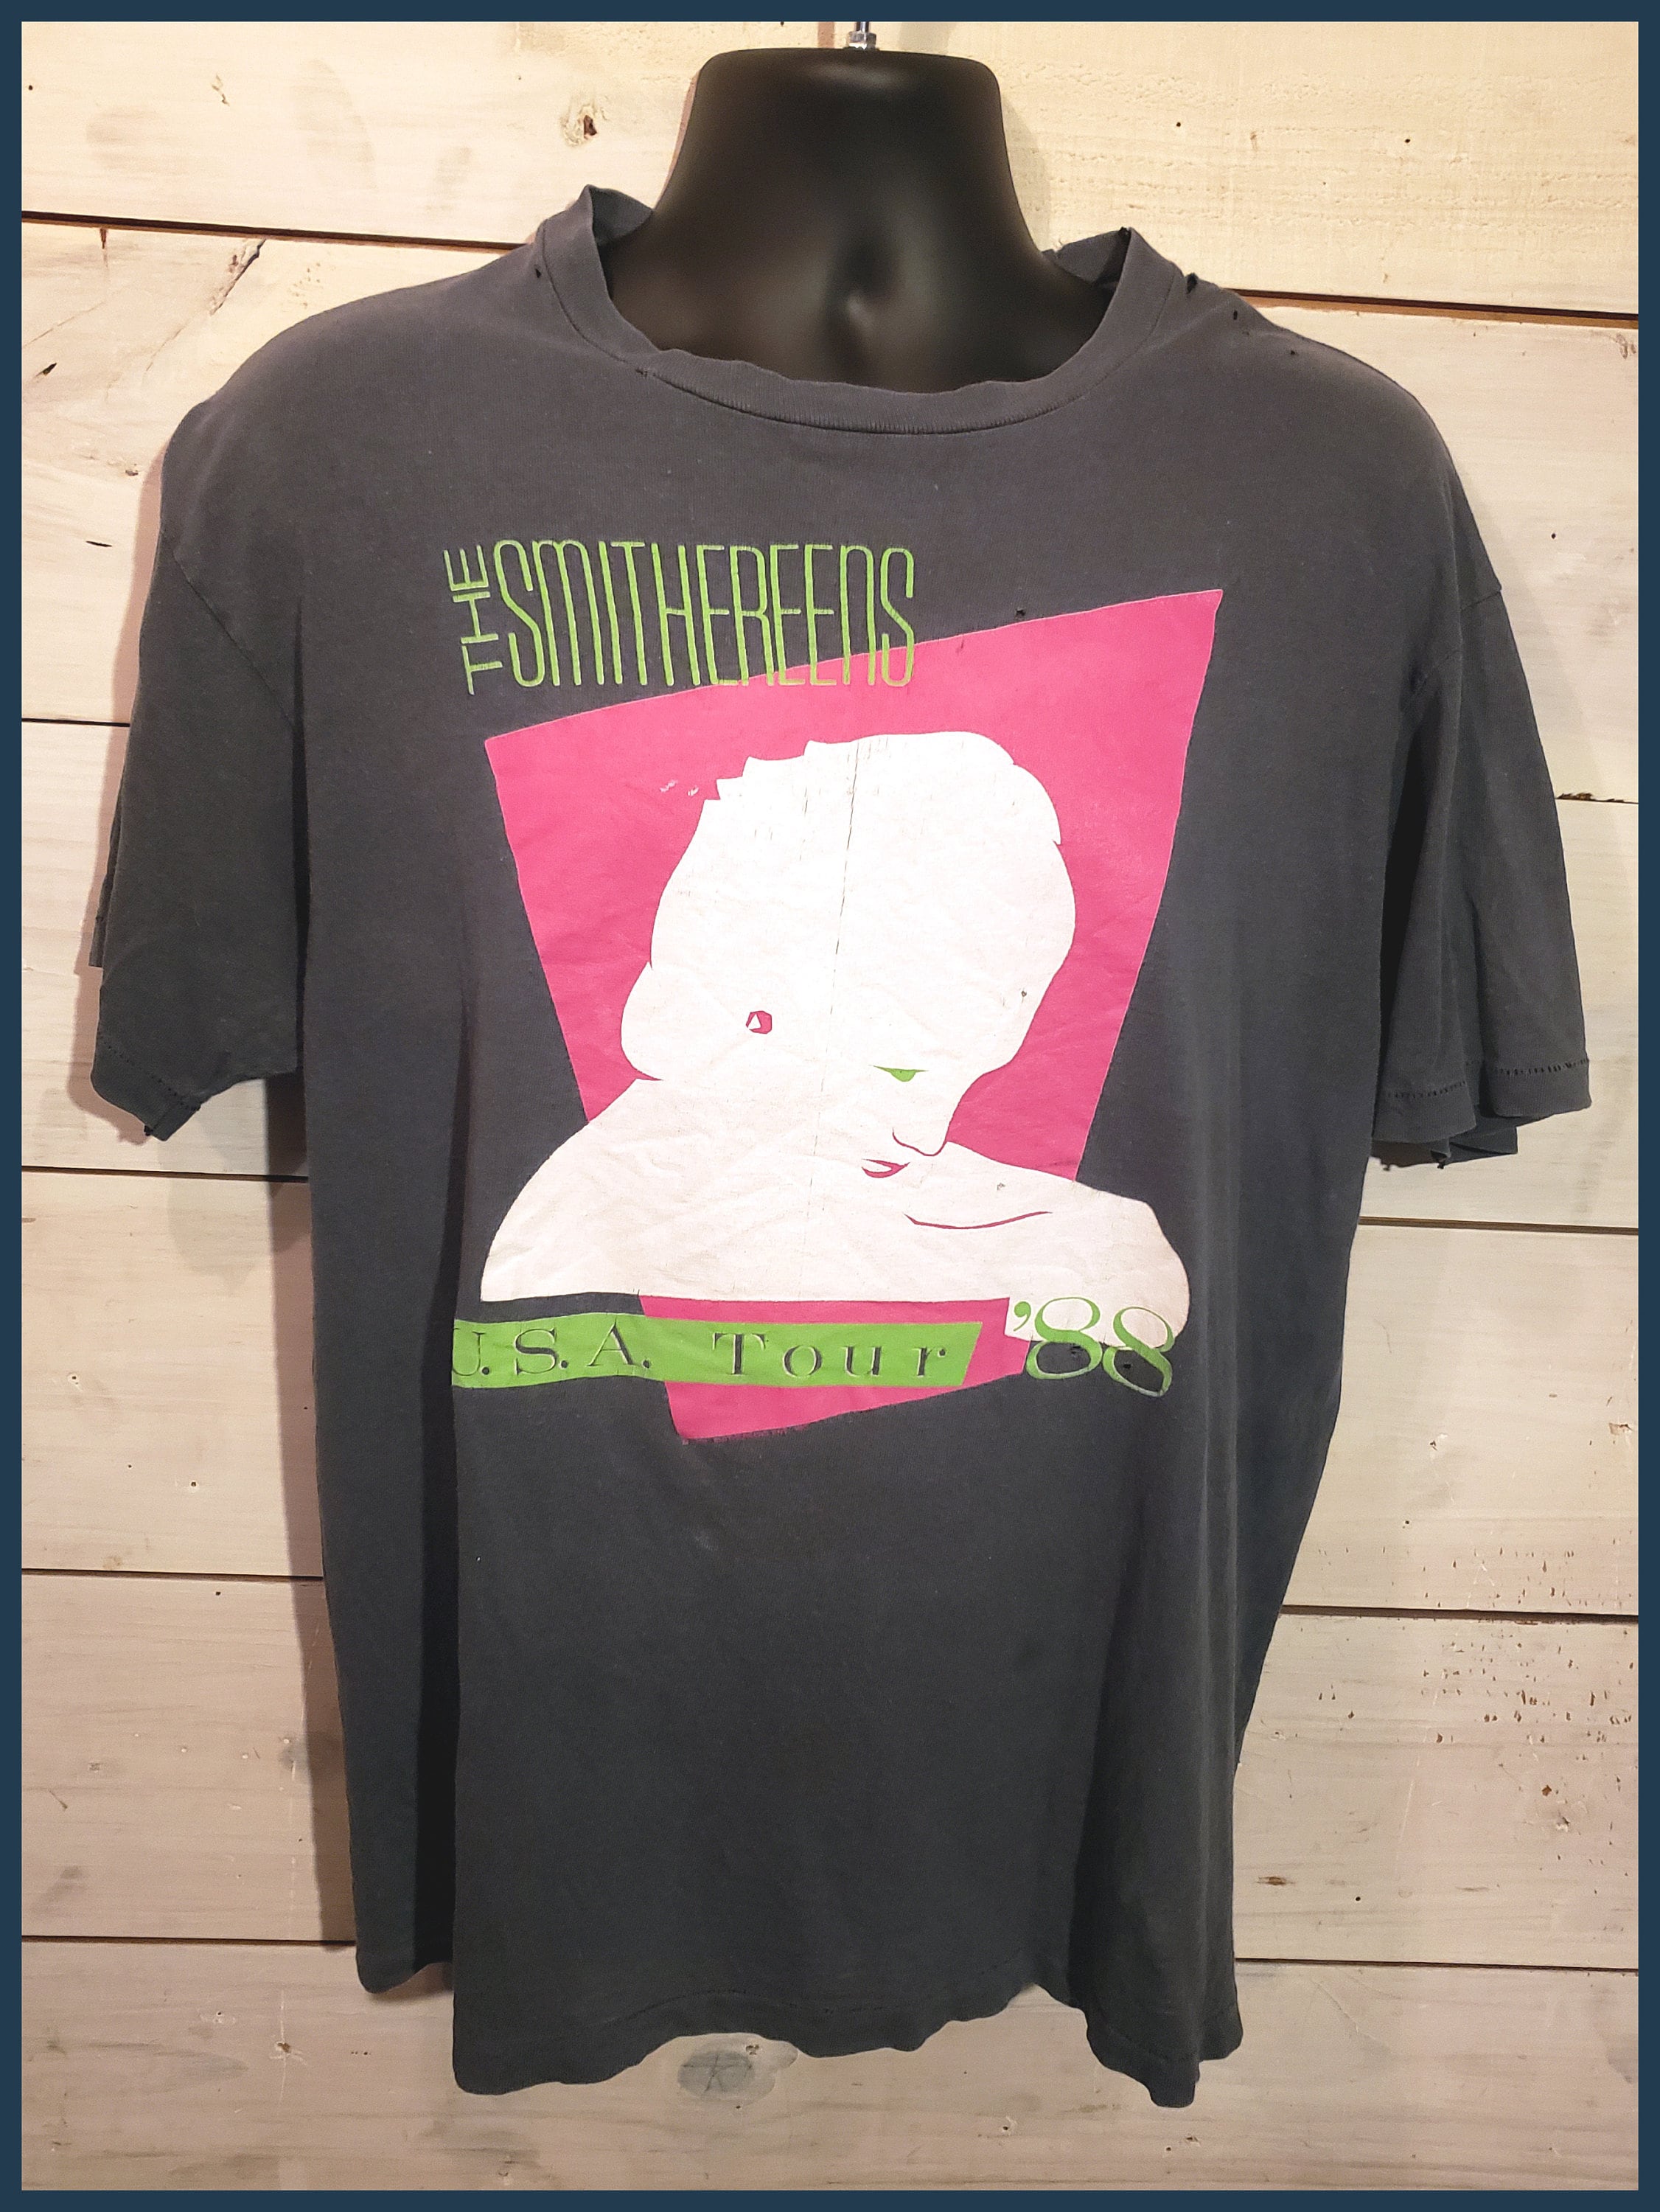 Vintage the Smithereens 1988 US Tour T-shirt - Etsy